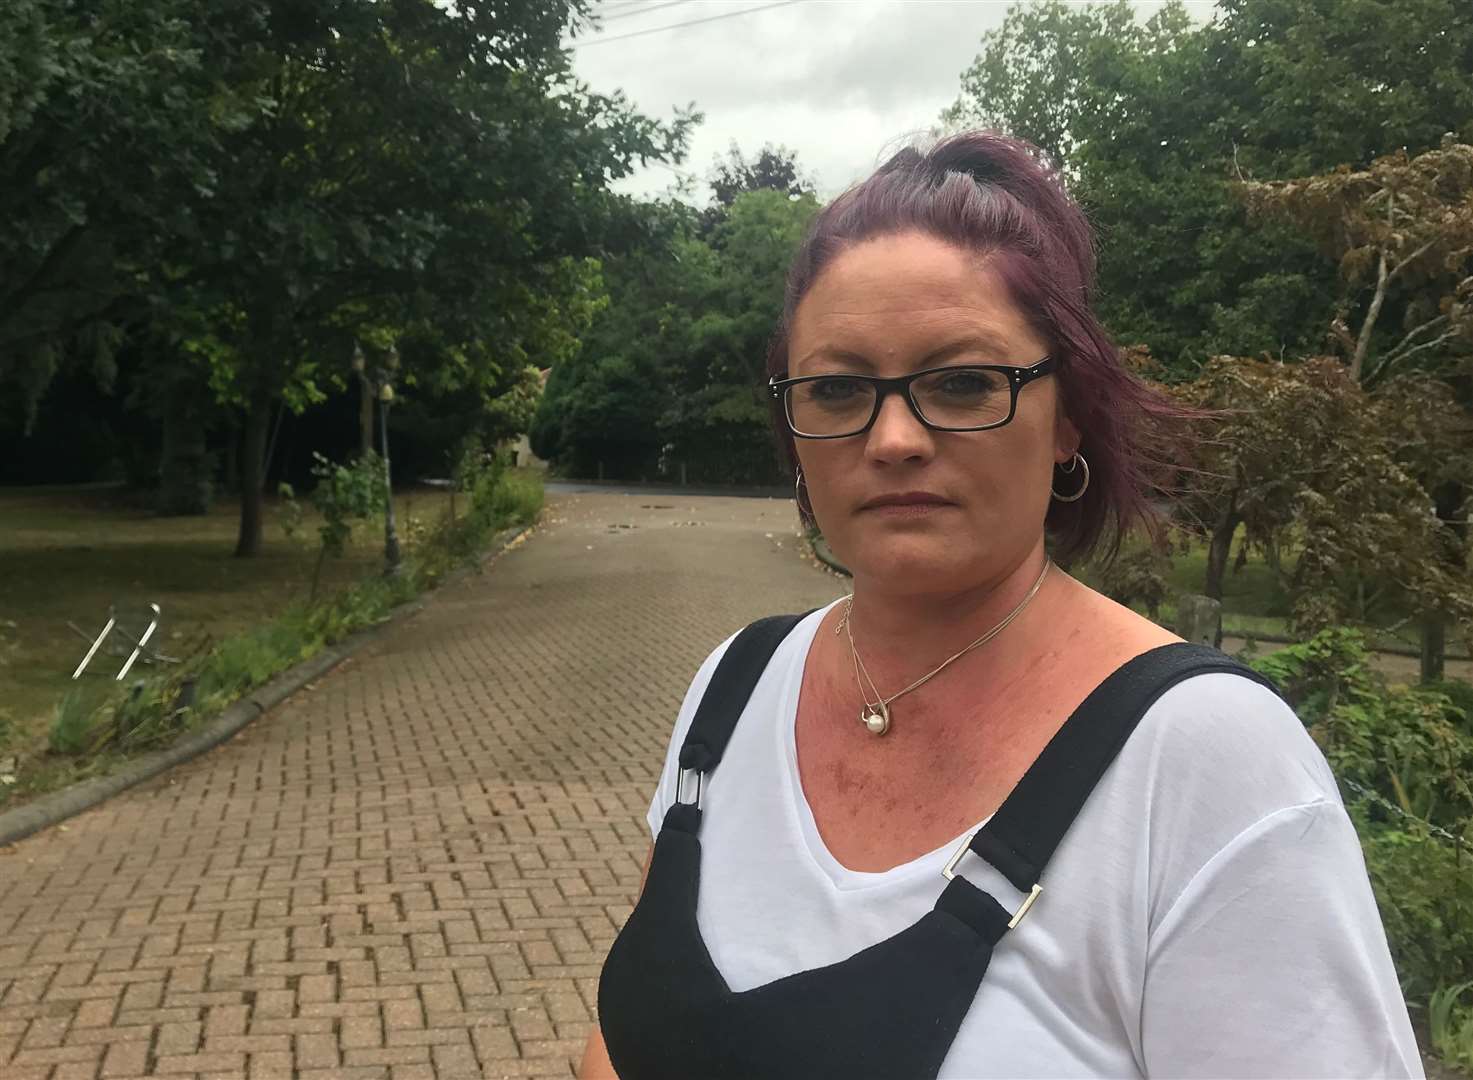 Stacey Epps, of Highfield Care Home, called the incident 'bizarre and shocking'